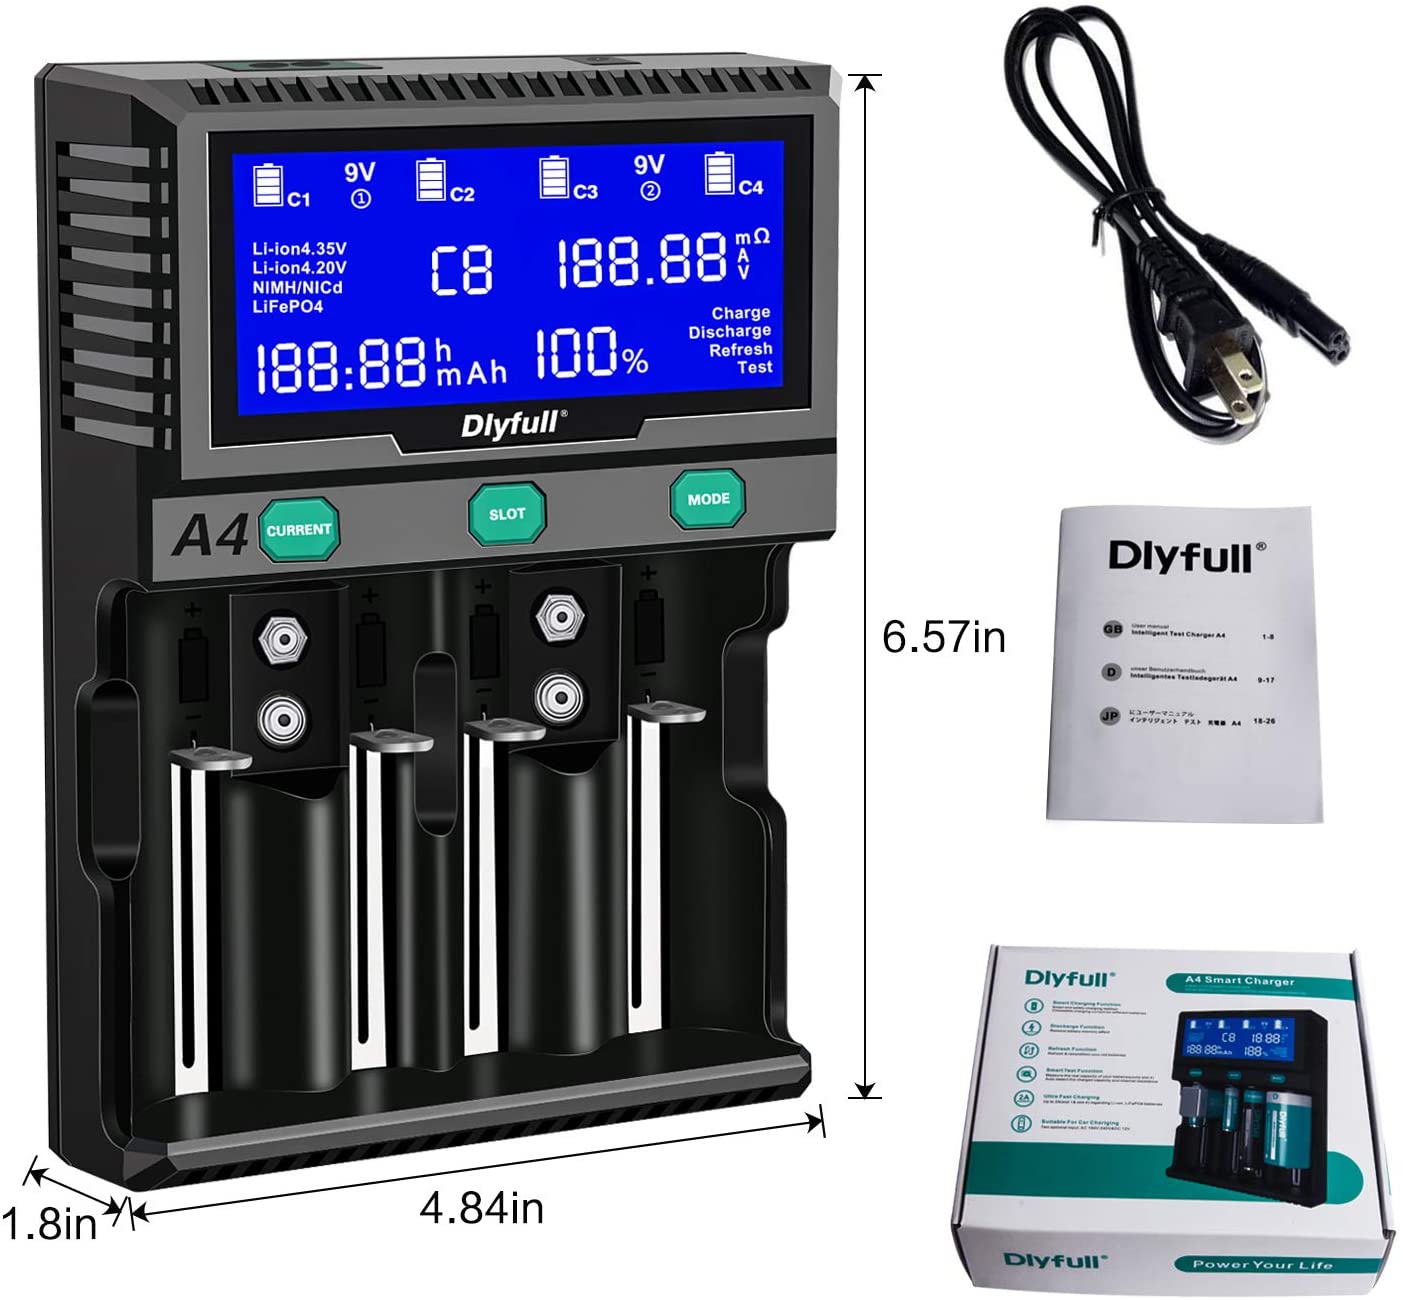 Dlyfull Smart A4 6 slots Universal Ni-MH Li-ion LiFePO4 Battery Charger with Discharge Test Function